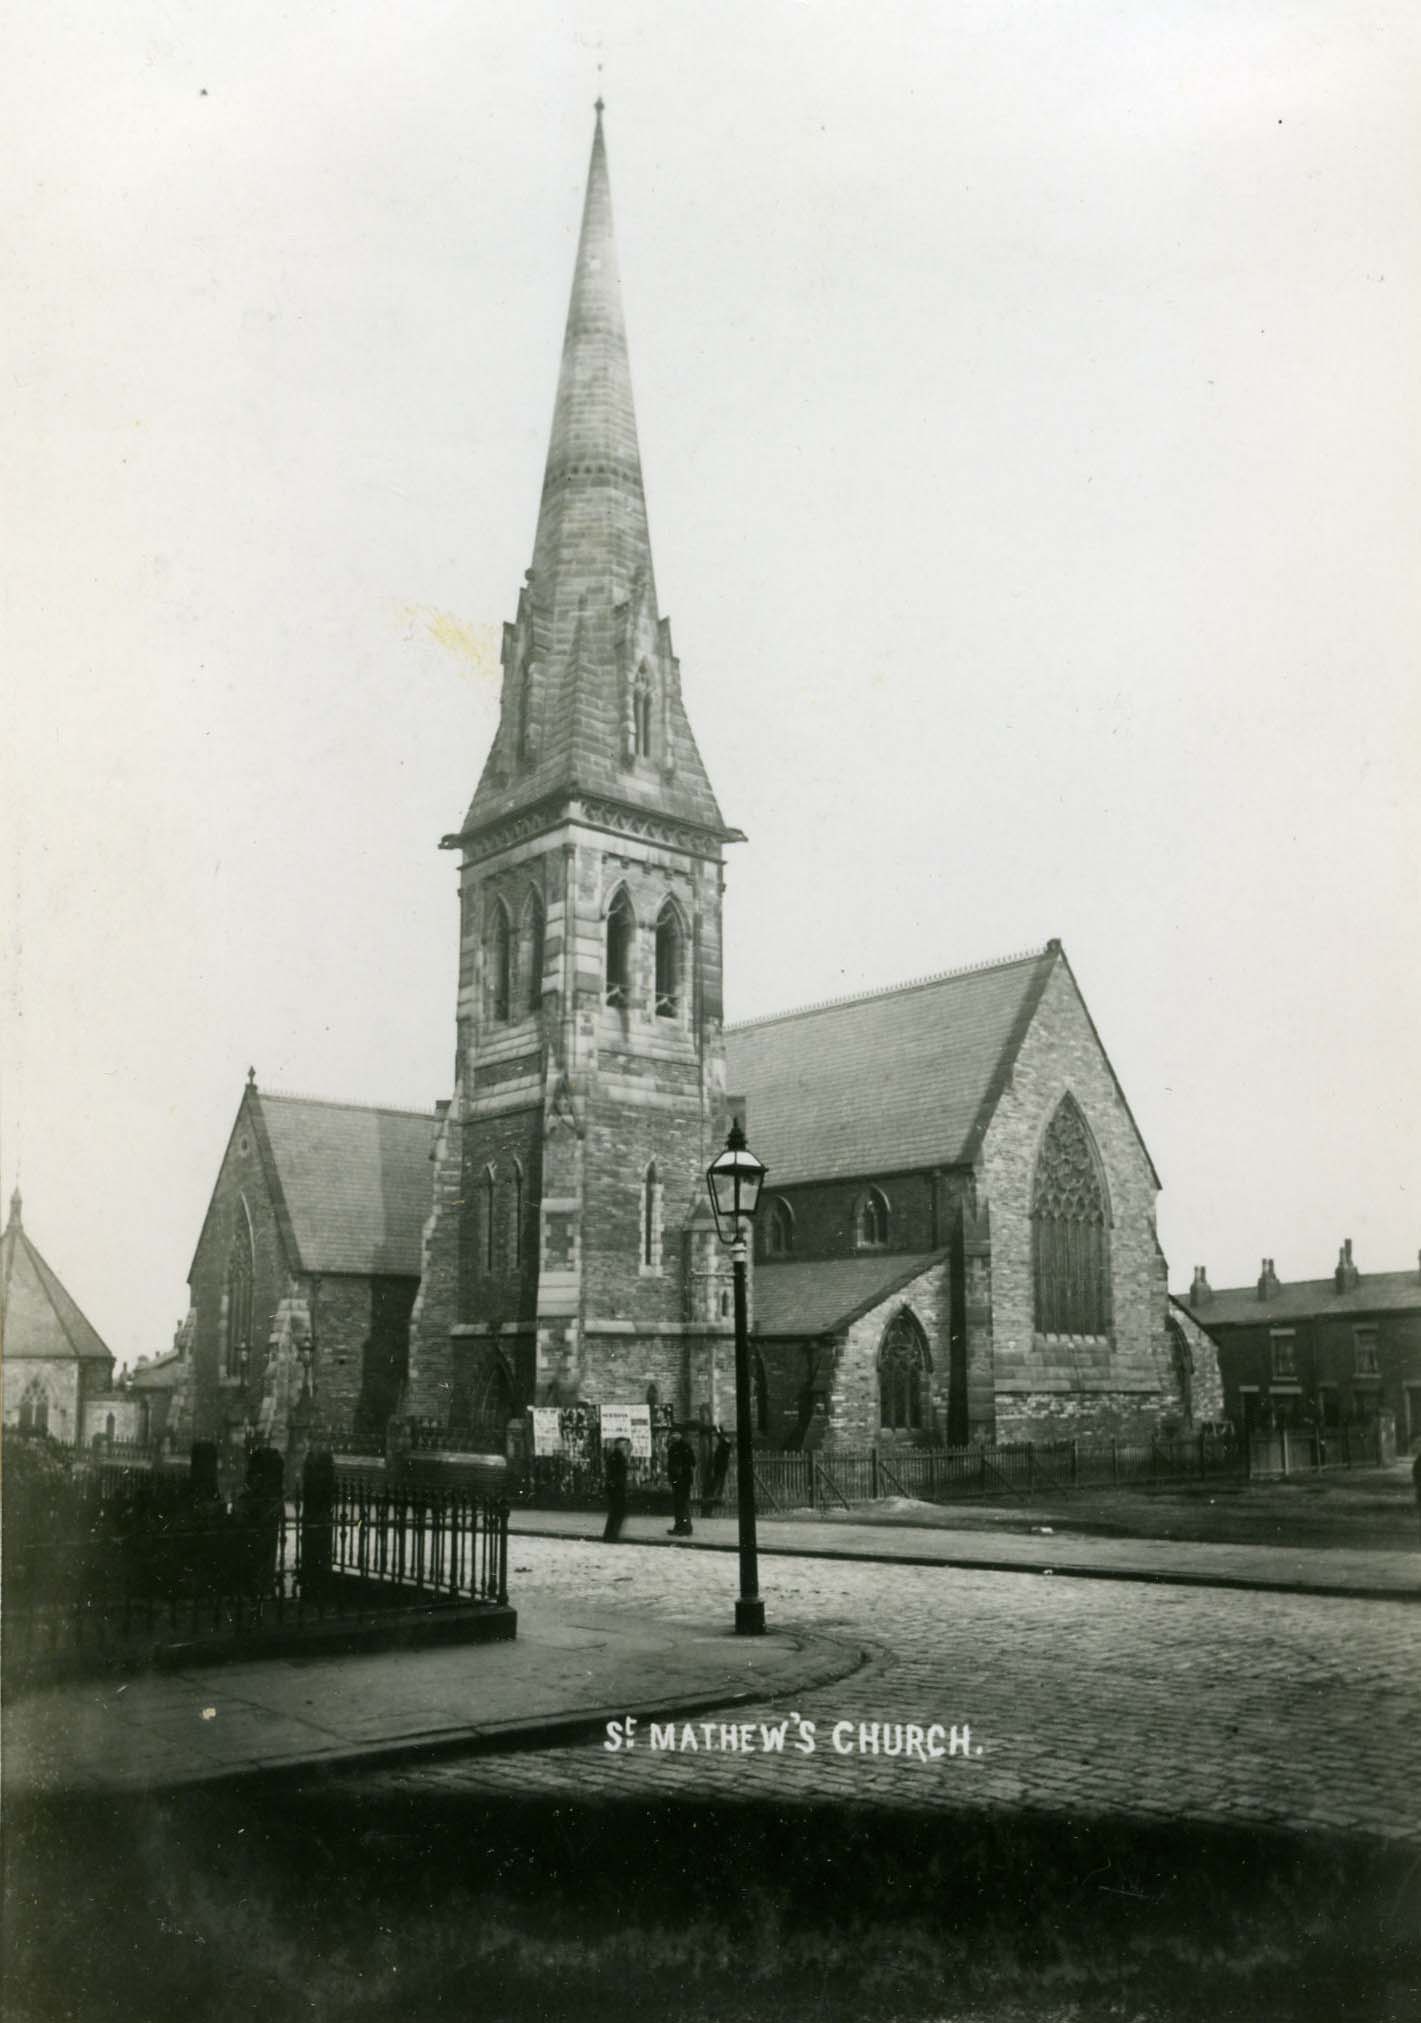 St Matthew's Church Photograph courtesy of Halliwell Local History Society